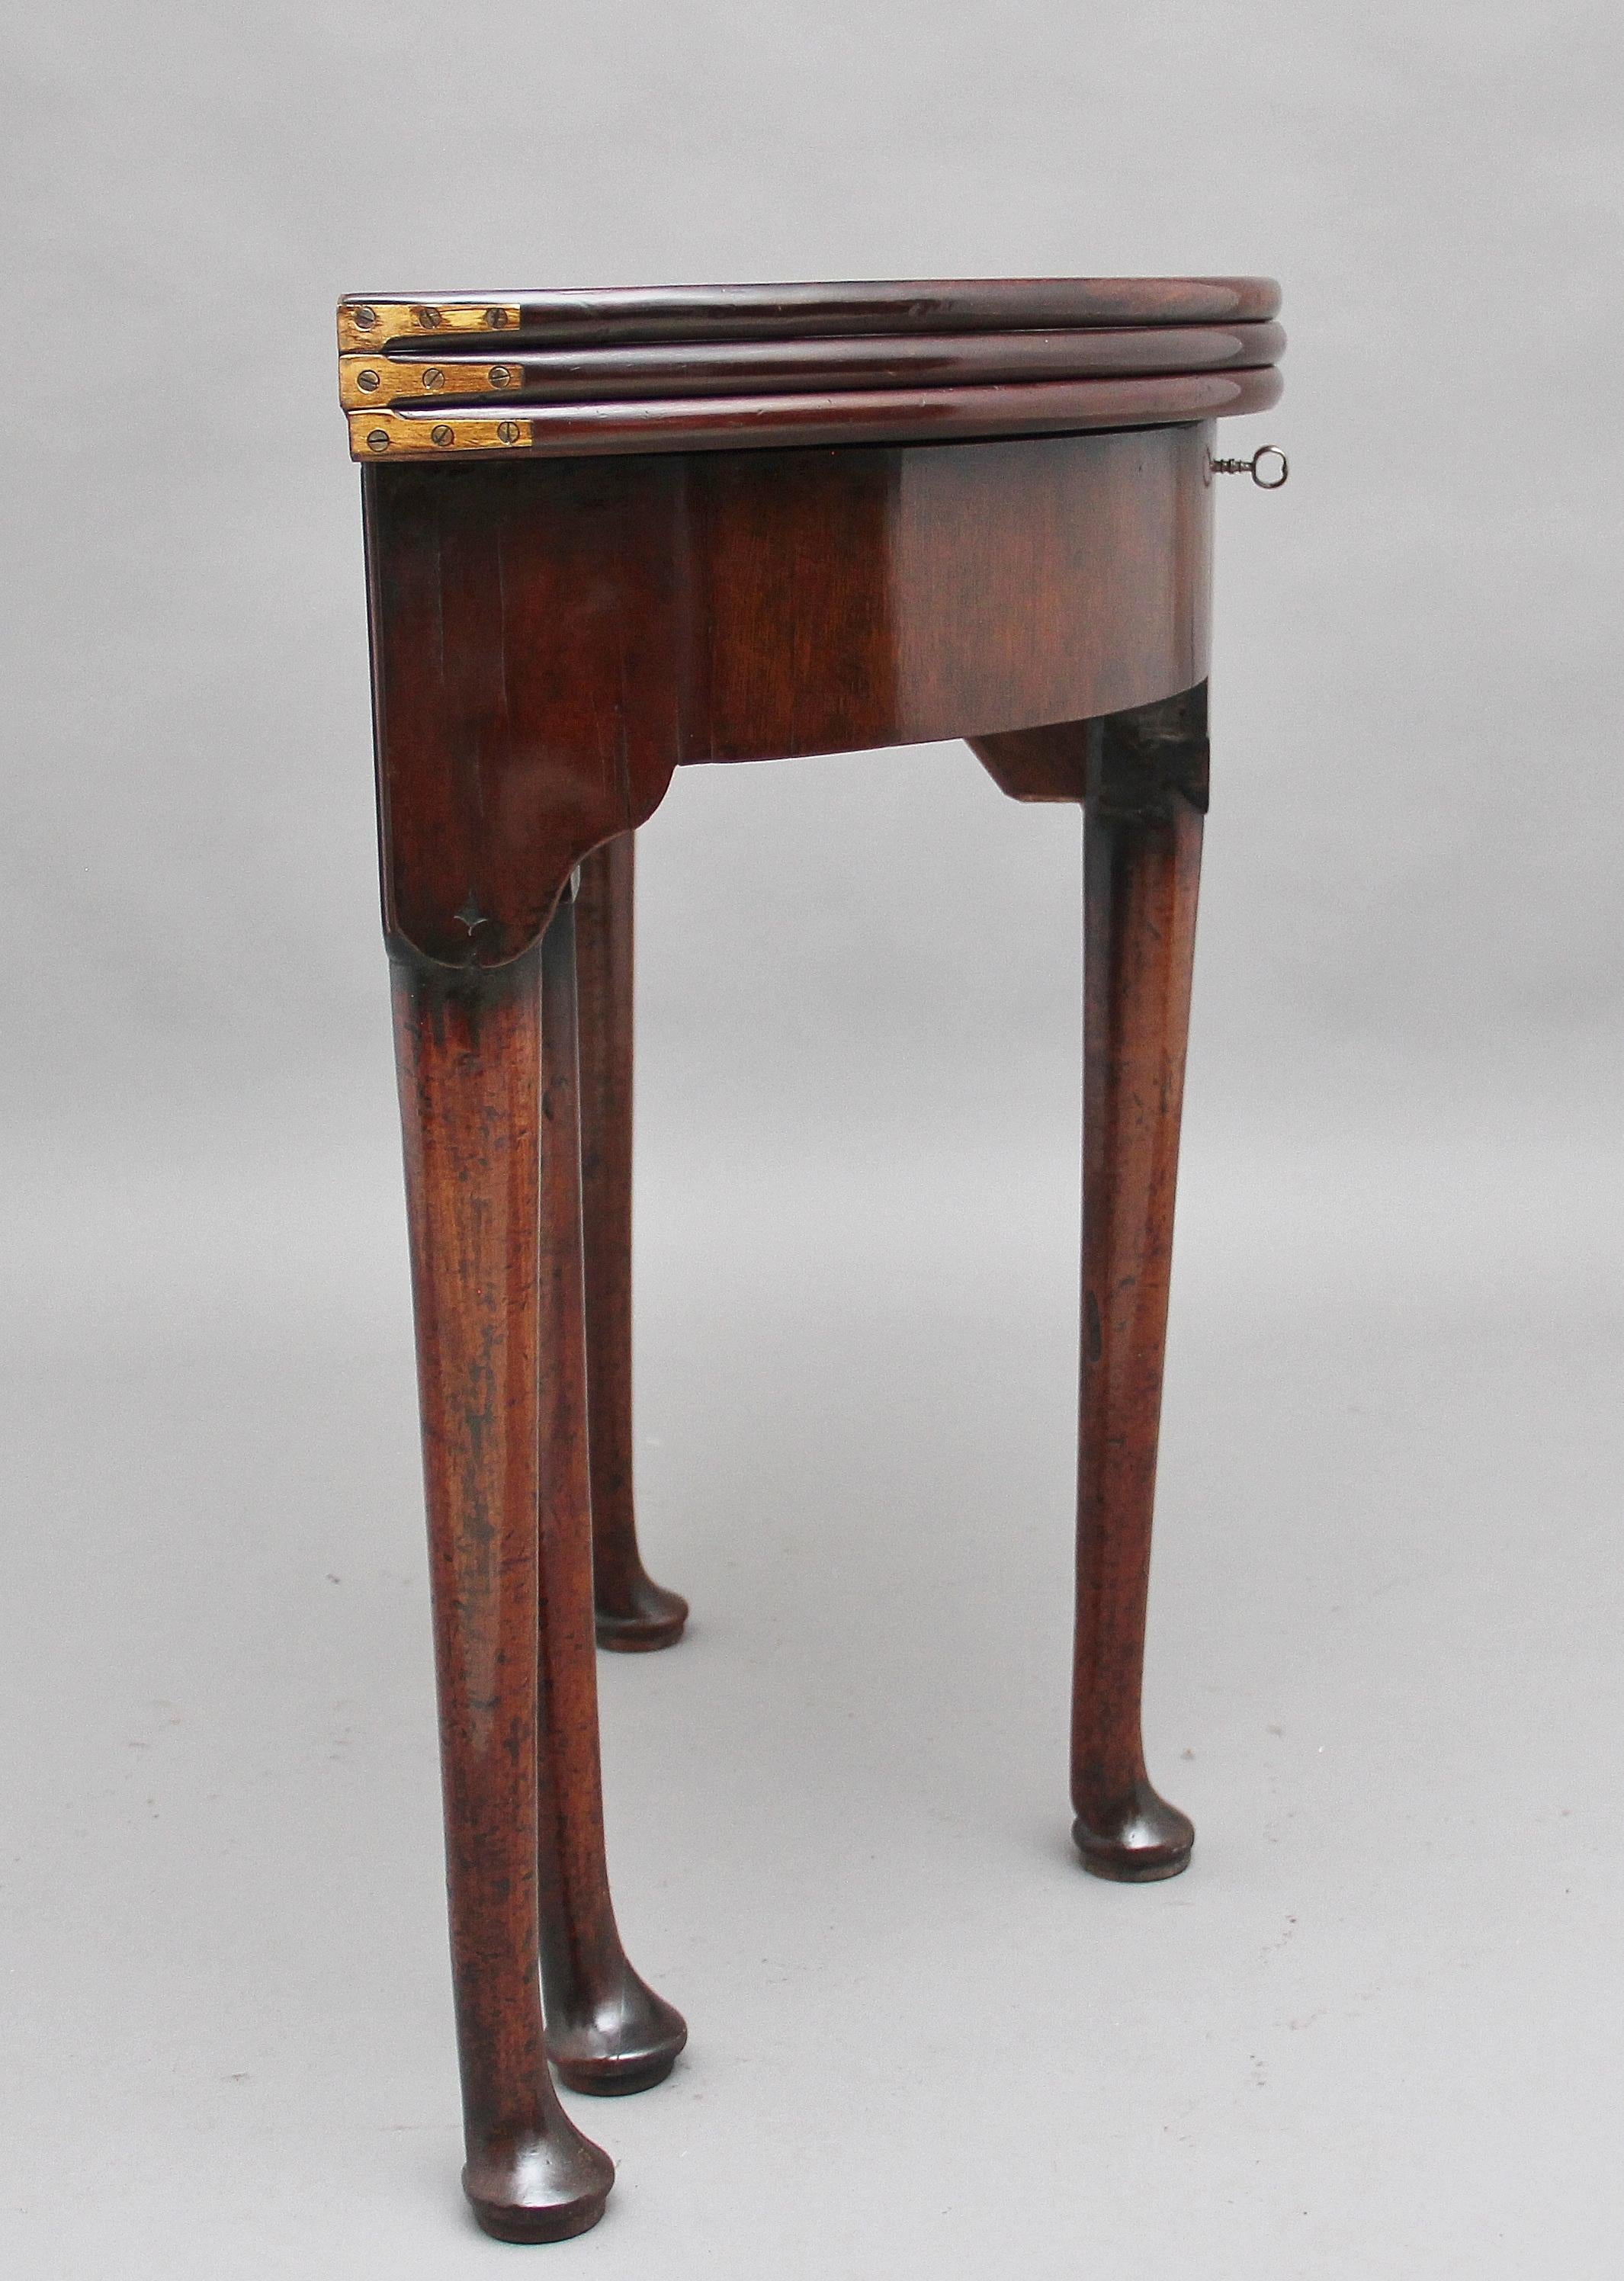 18th century triple top games table, the triple fold over top consisting of an oak lined compartment, a green baize playing surface and a solid top surface, standing on four turned legs terminating on a pad foot, circa 1760.